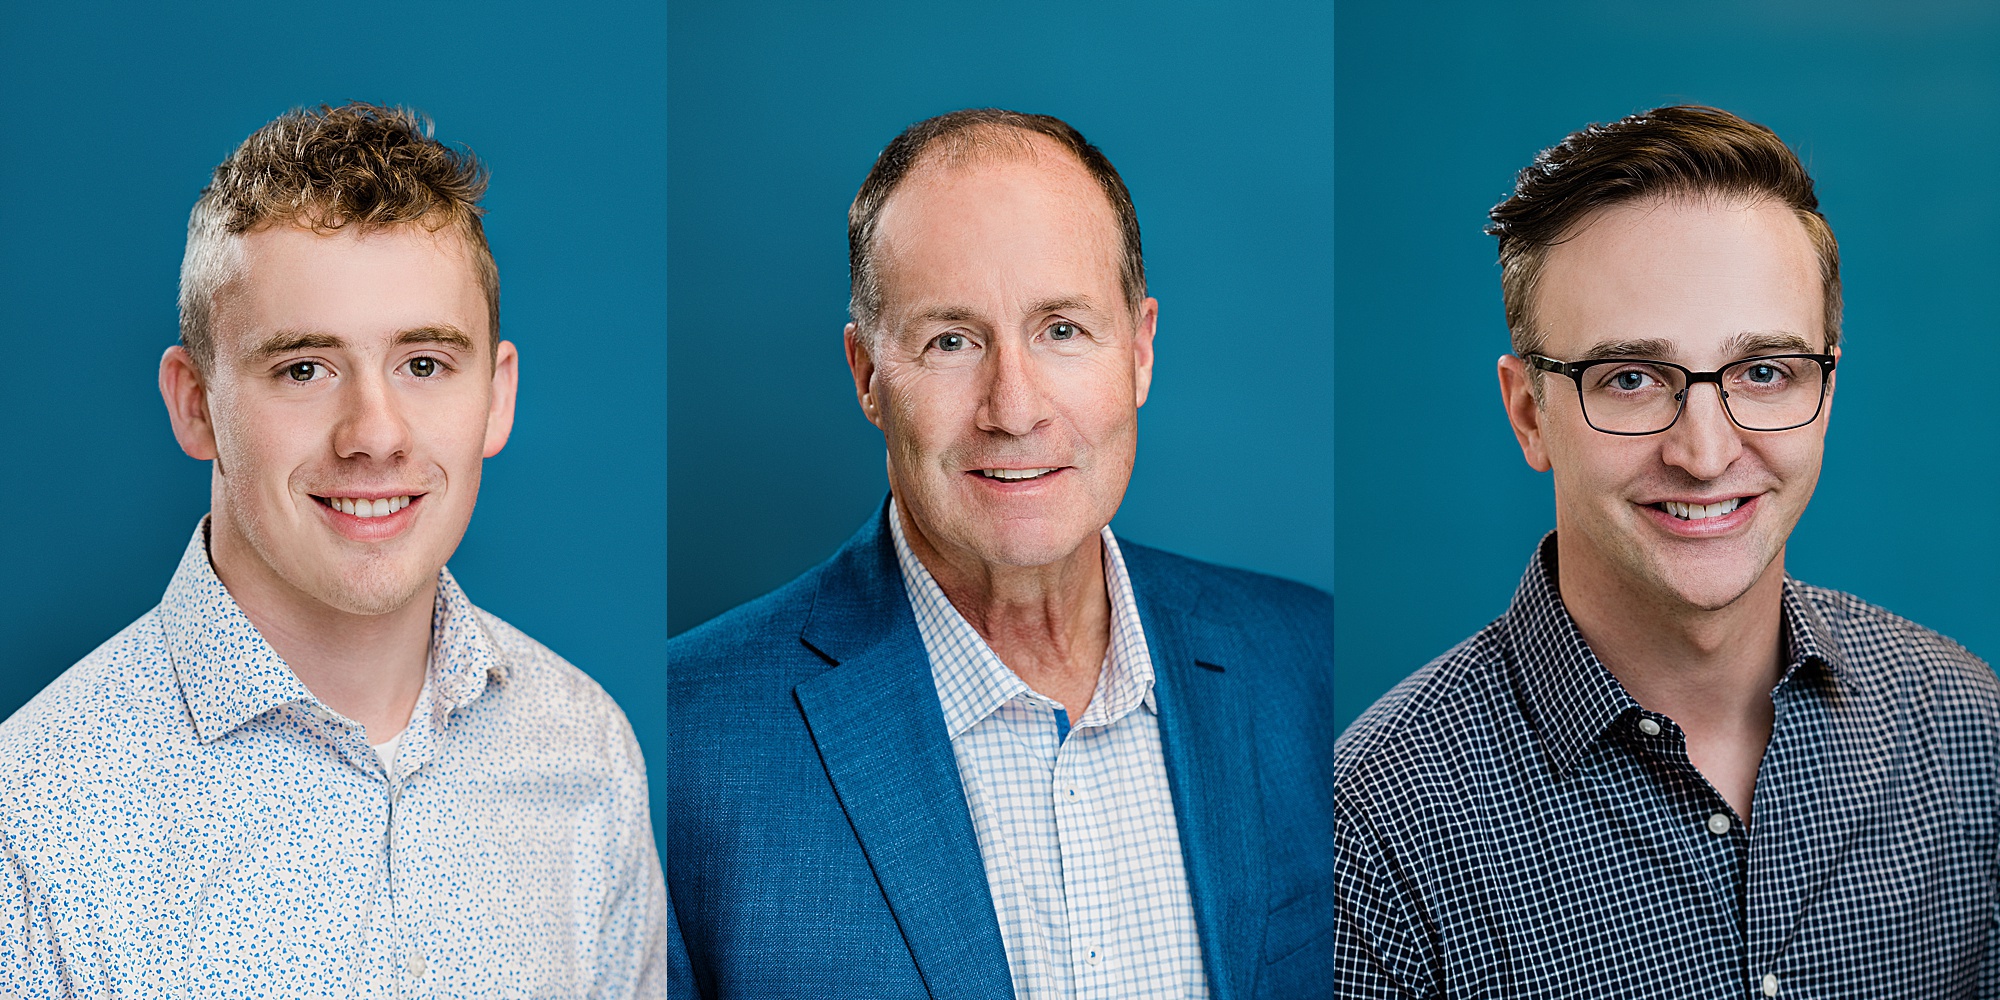 Lansing head shot photography - three headshots of men on a bright blue background, by Allie Siarto & Co., Lansing branding and commercial photographer 